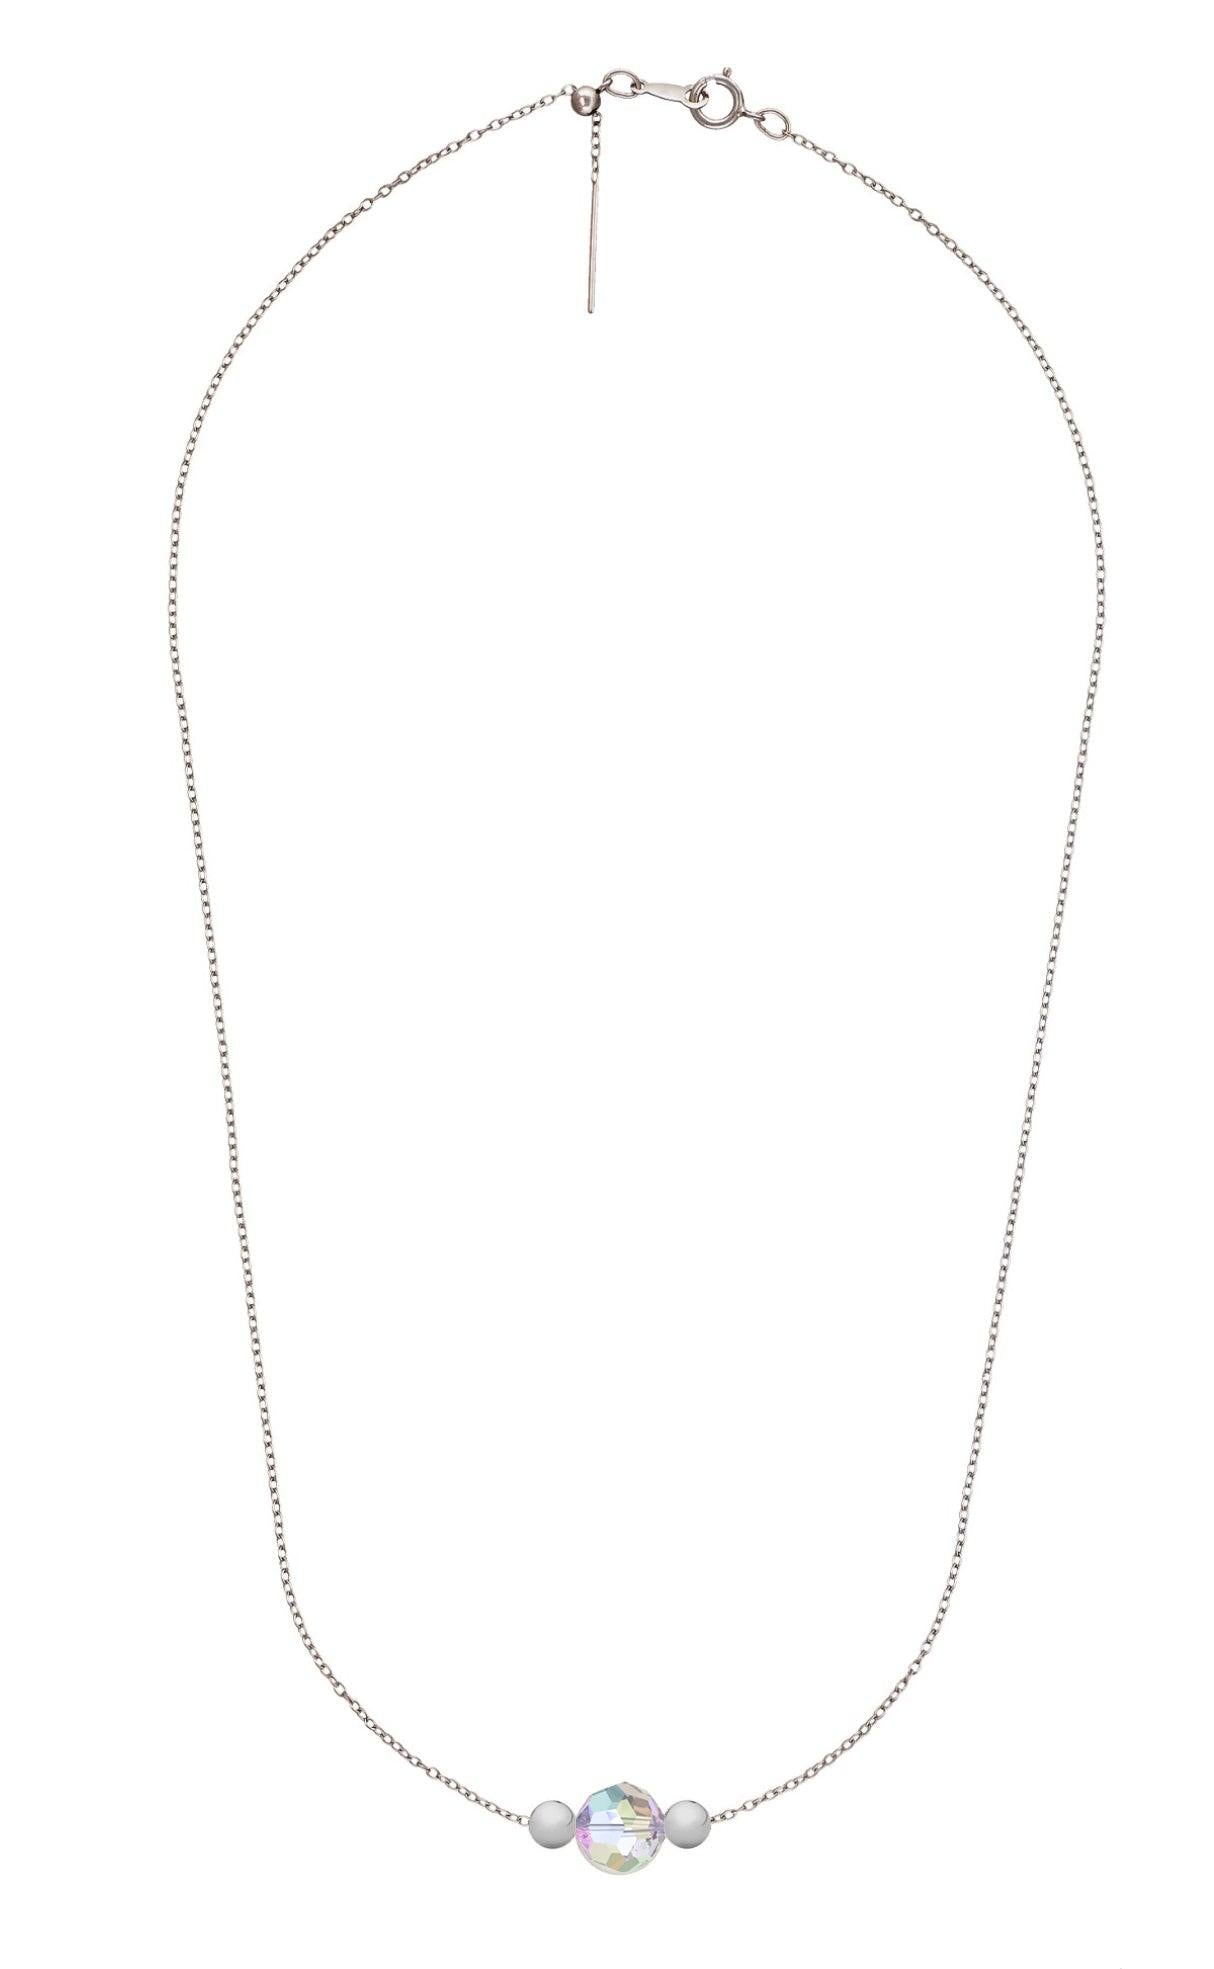 .925 Sterling silver Add-A-Bead Cable Chain Necklace - Adjustable (1 Piece)